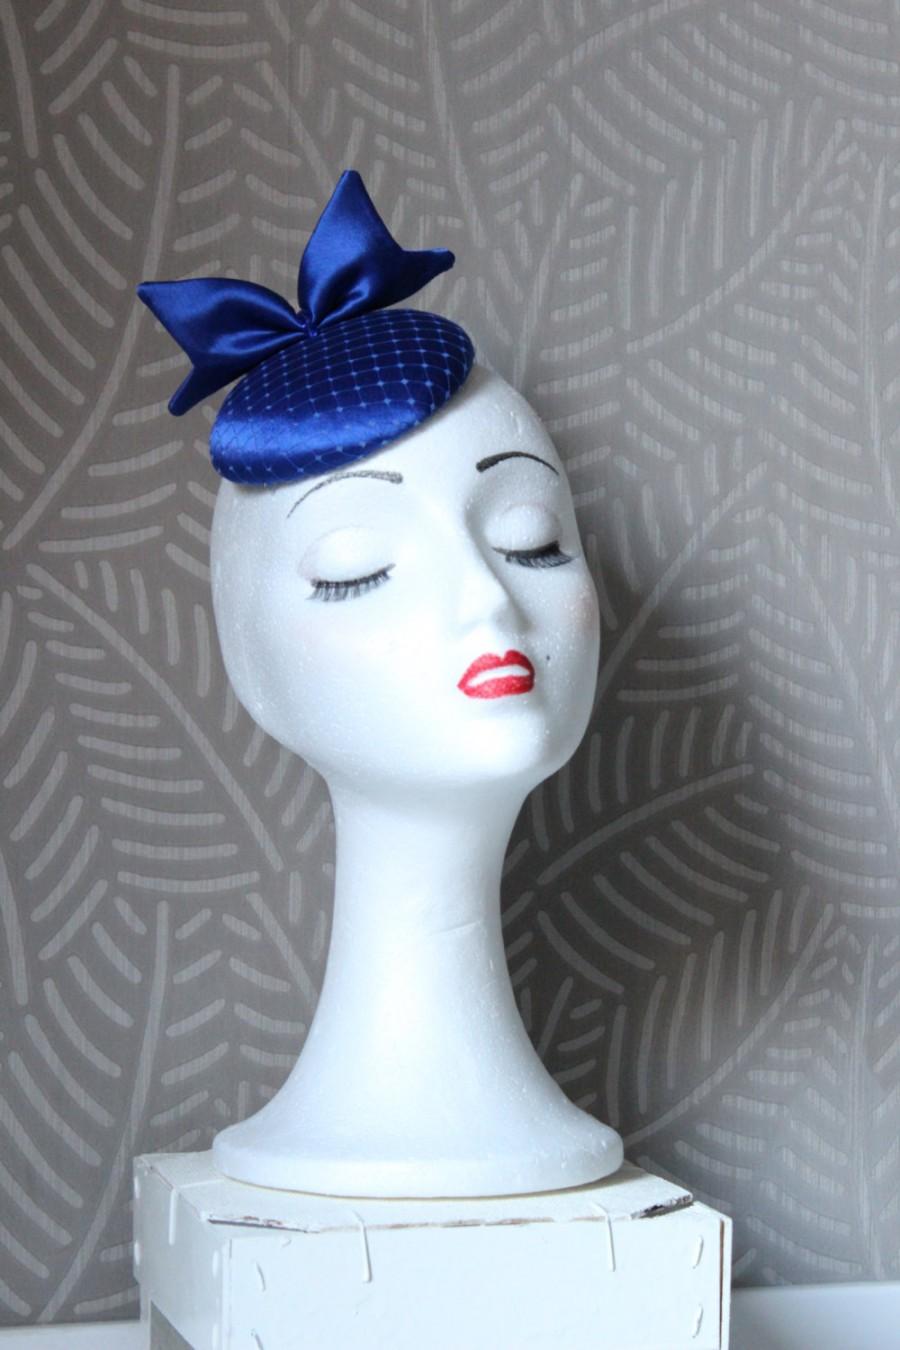 Wedding - Royal Blue Fascinator with bow,Cocktail hat, mini royal blue hat, Wedding mini hat, Satin Hat, Veil Hat, small blue hat for wedding, 